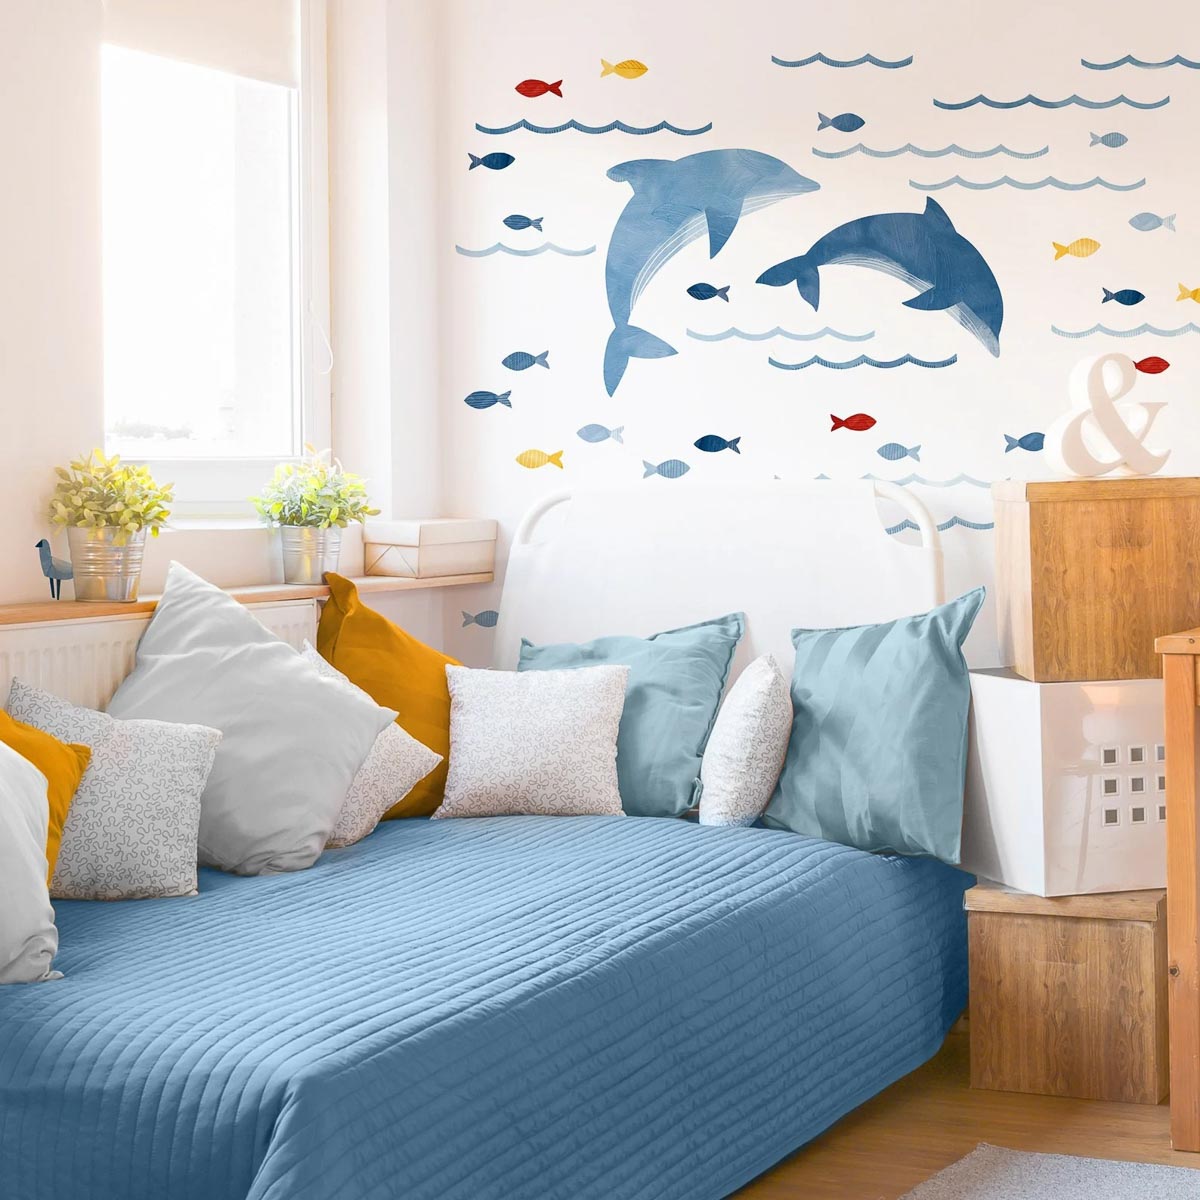 Love these dolphin wall decals as above bed decor